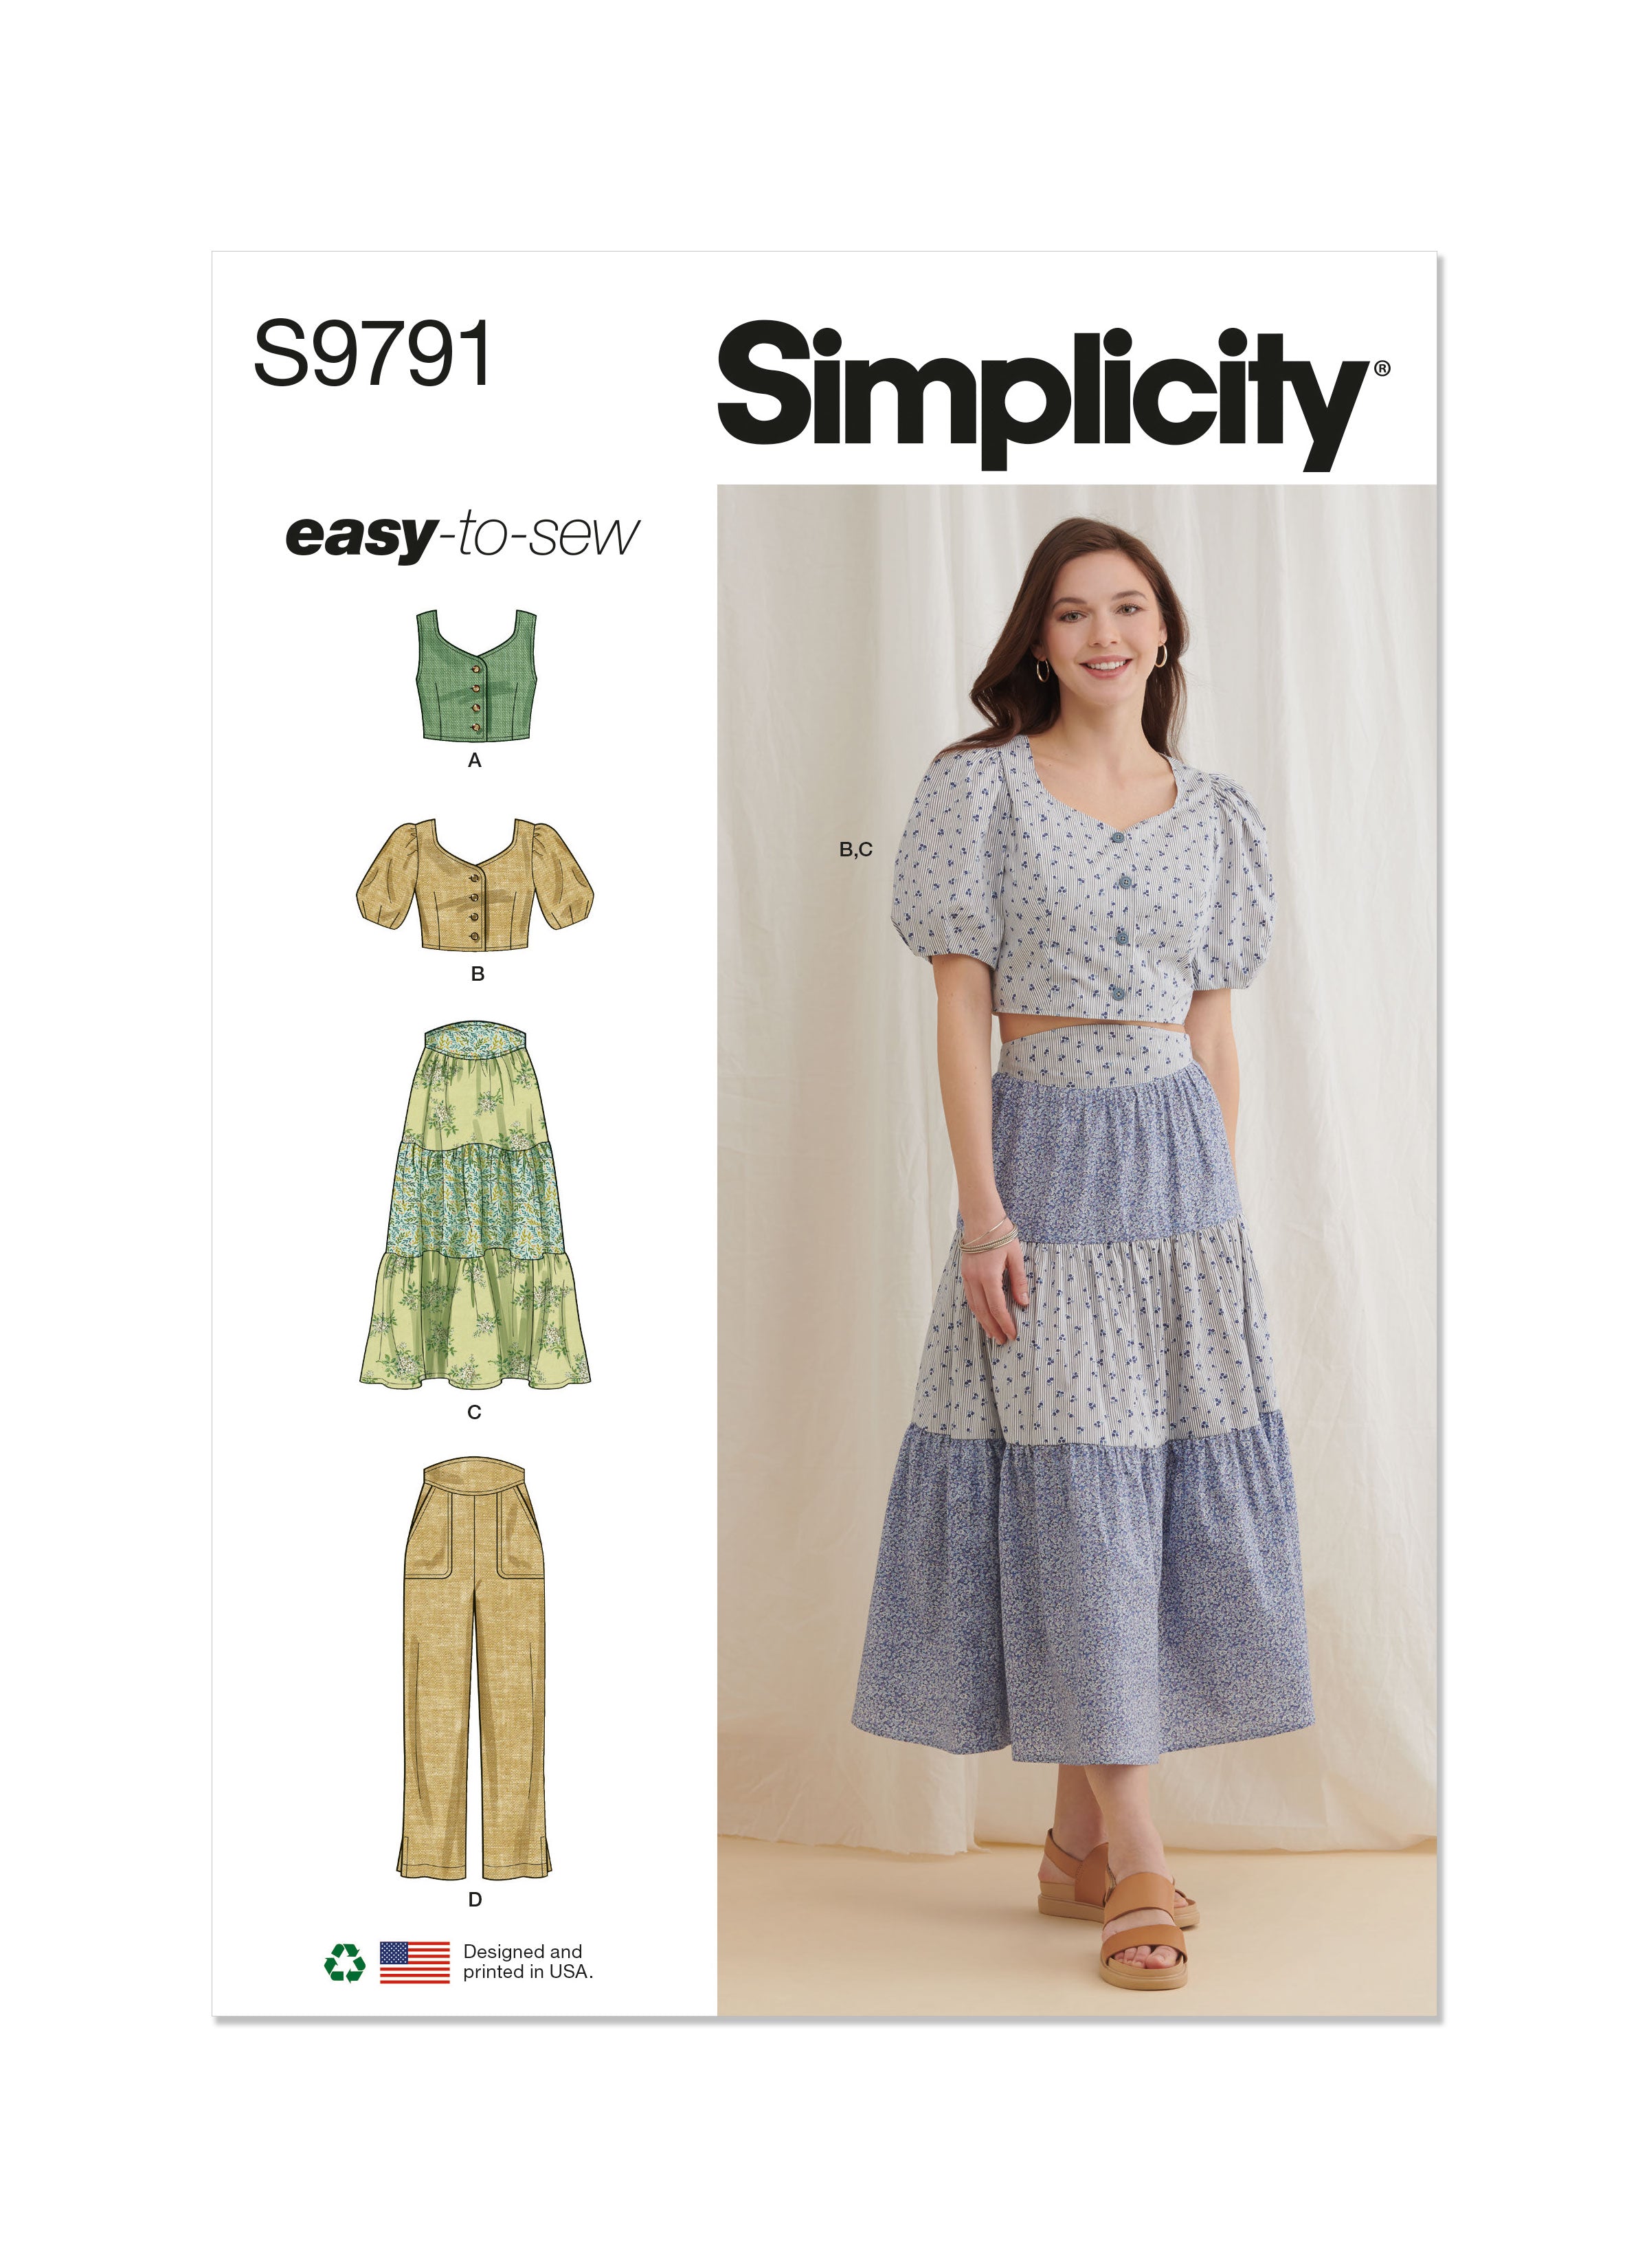 Simplicity sewing pattern 9791 Tops, Skirt and Pants from Jaycotts Sewing Supplies